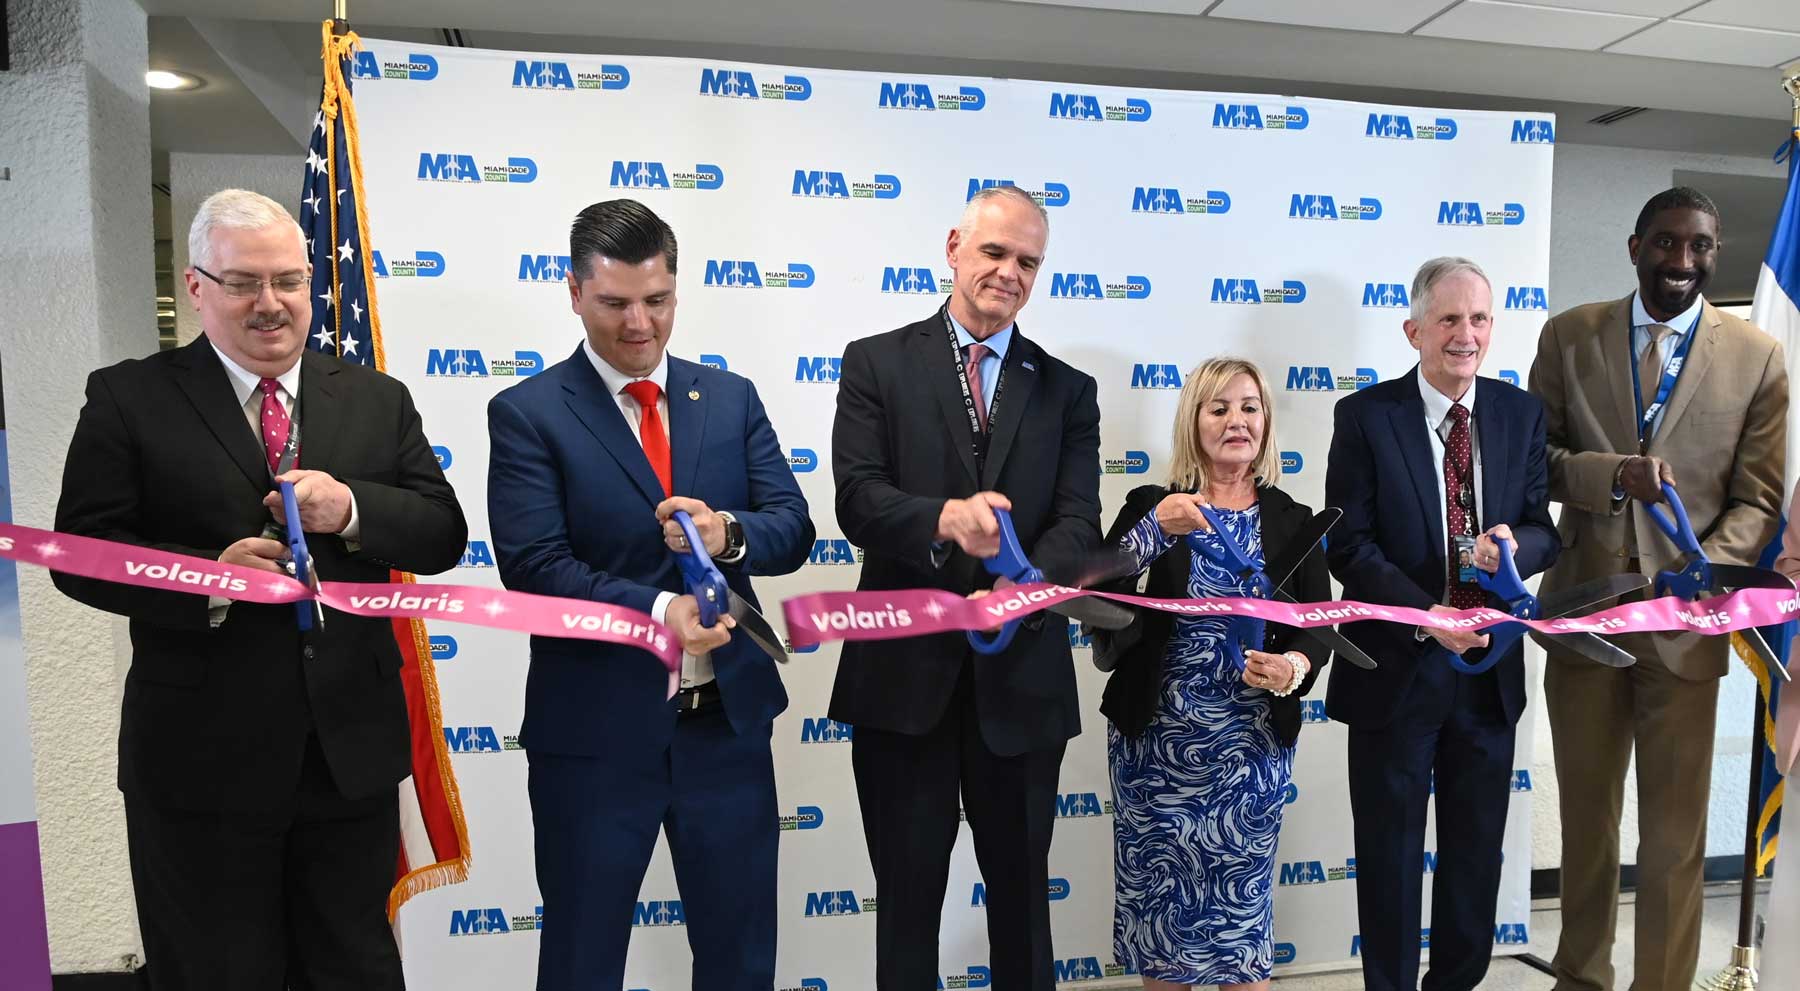 Officials with Volaris and Miami International cut the ribbon on the new service.